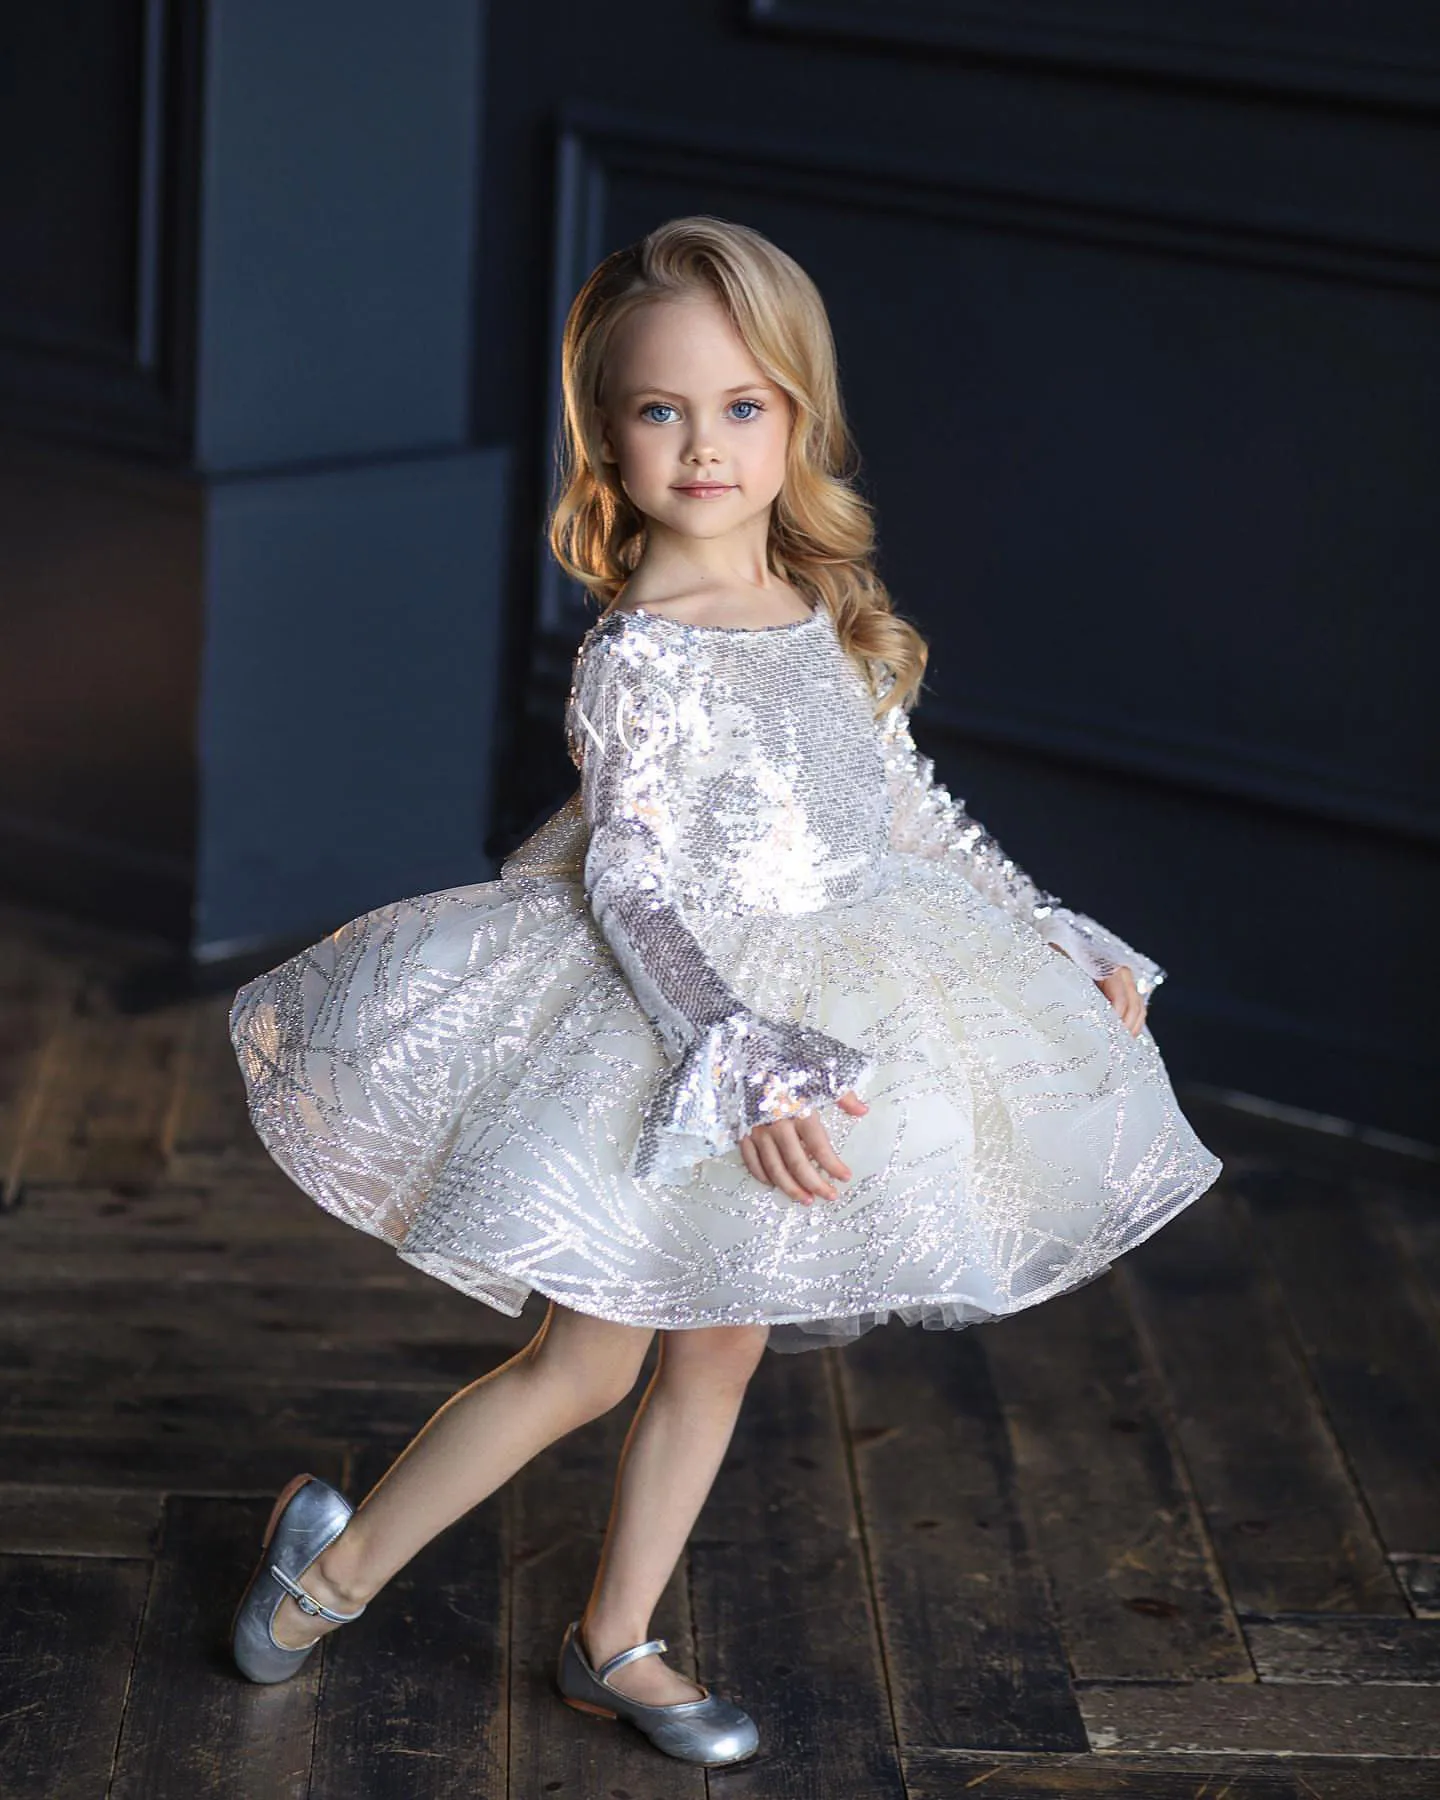 New Silver Sequined Flower Girl Dresses for Wedding Princess Birthday Dress Tulle Kids Gown Long Sleeves Party Clothes 1-12Y